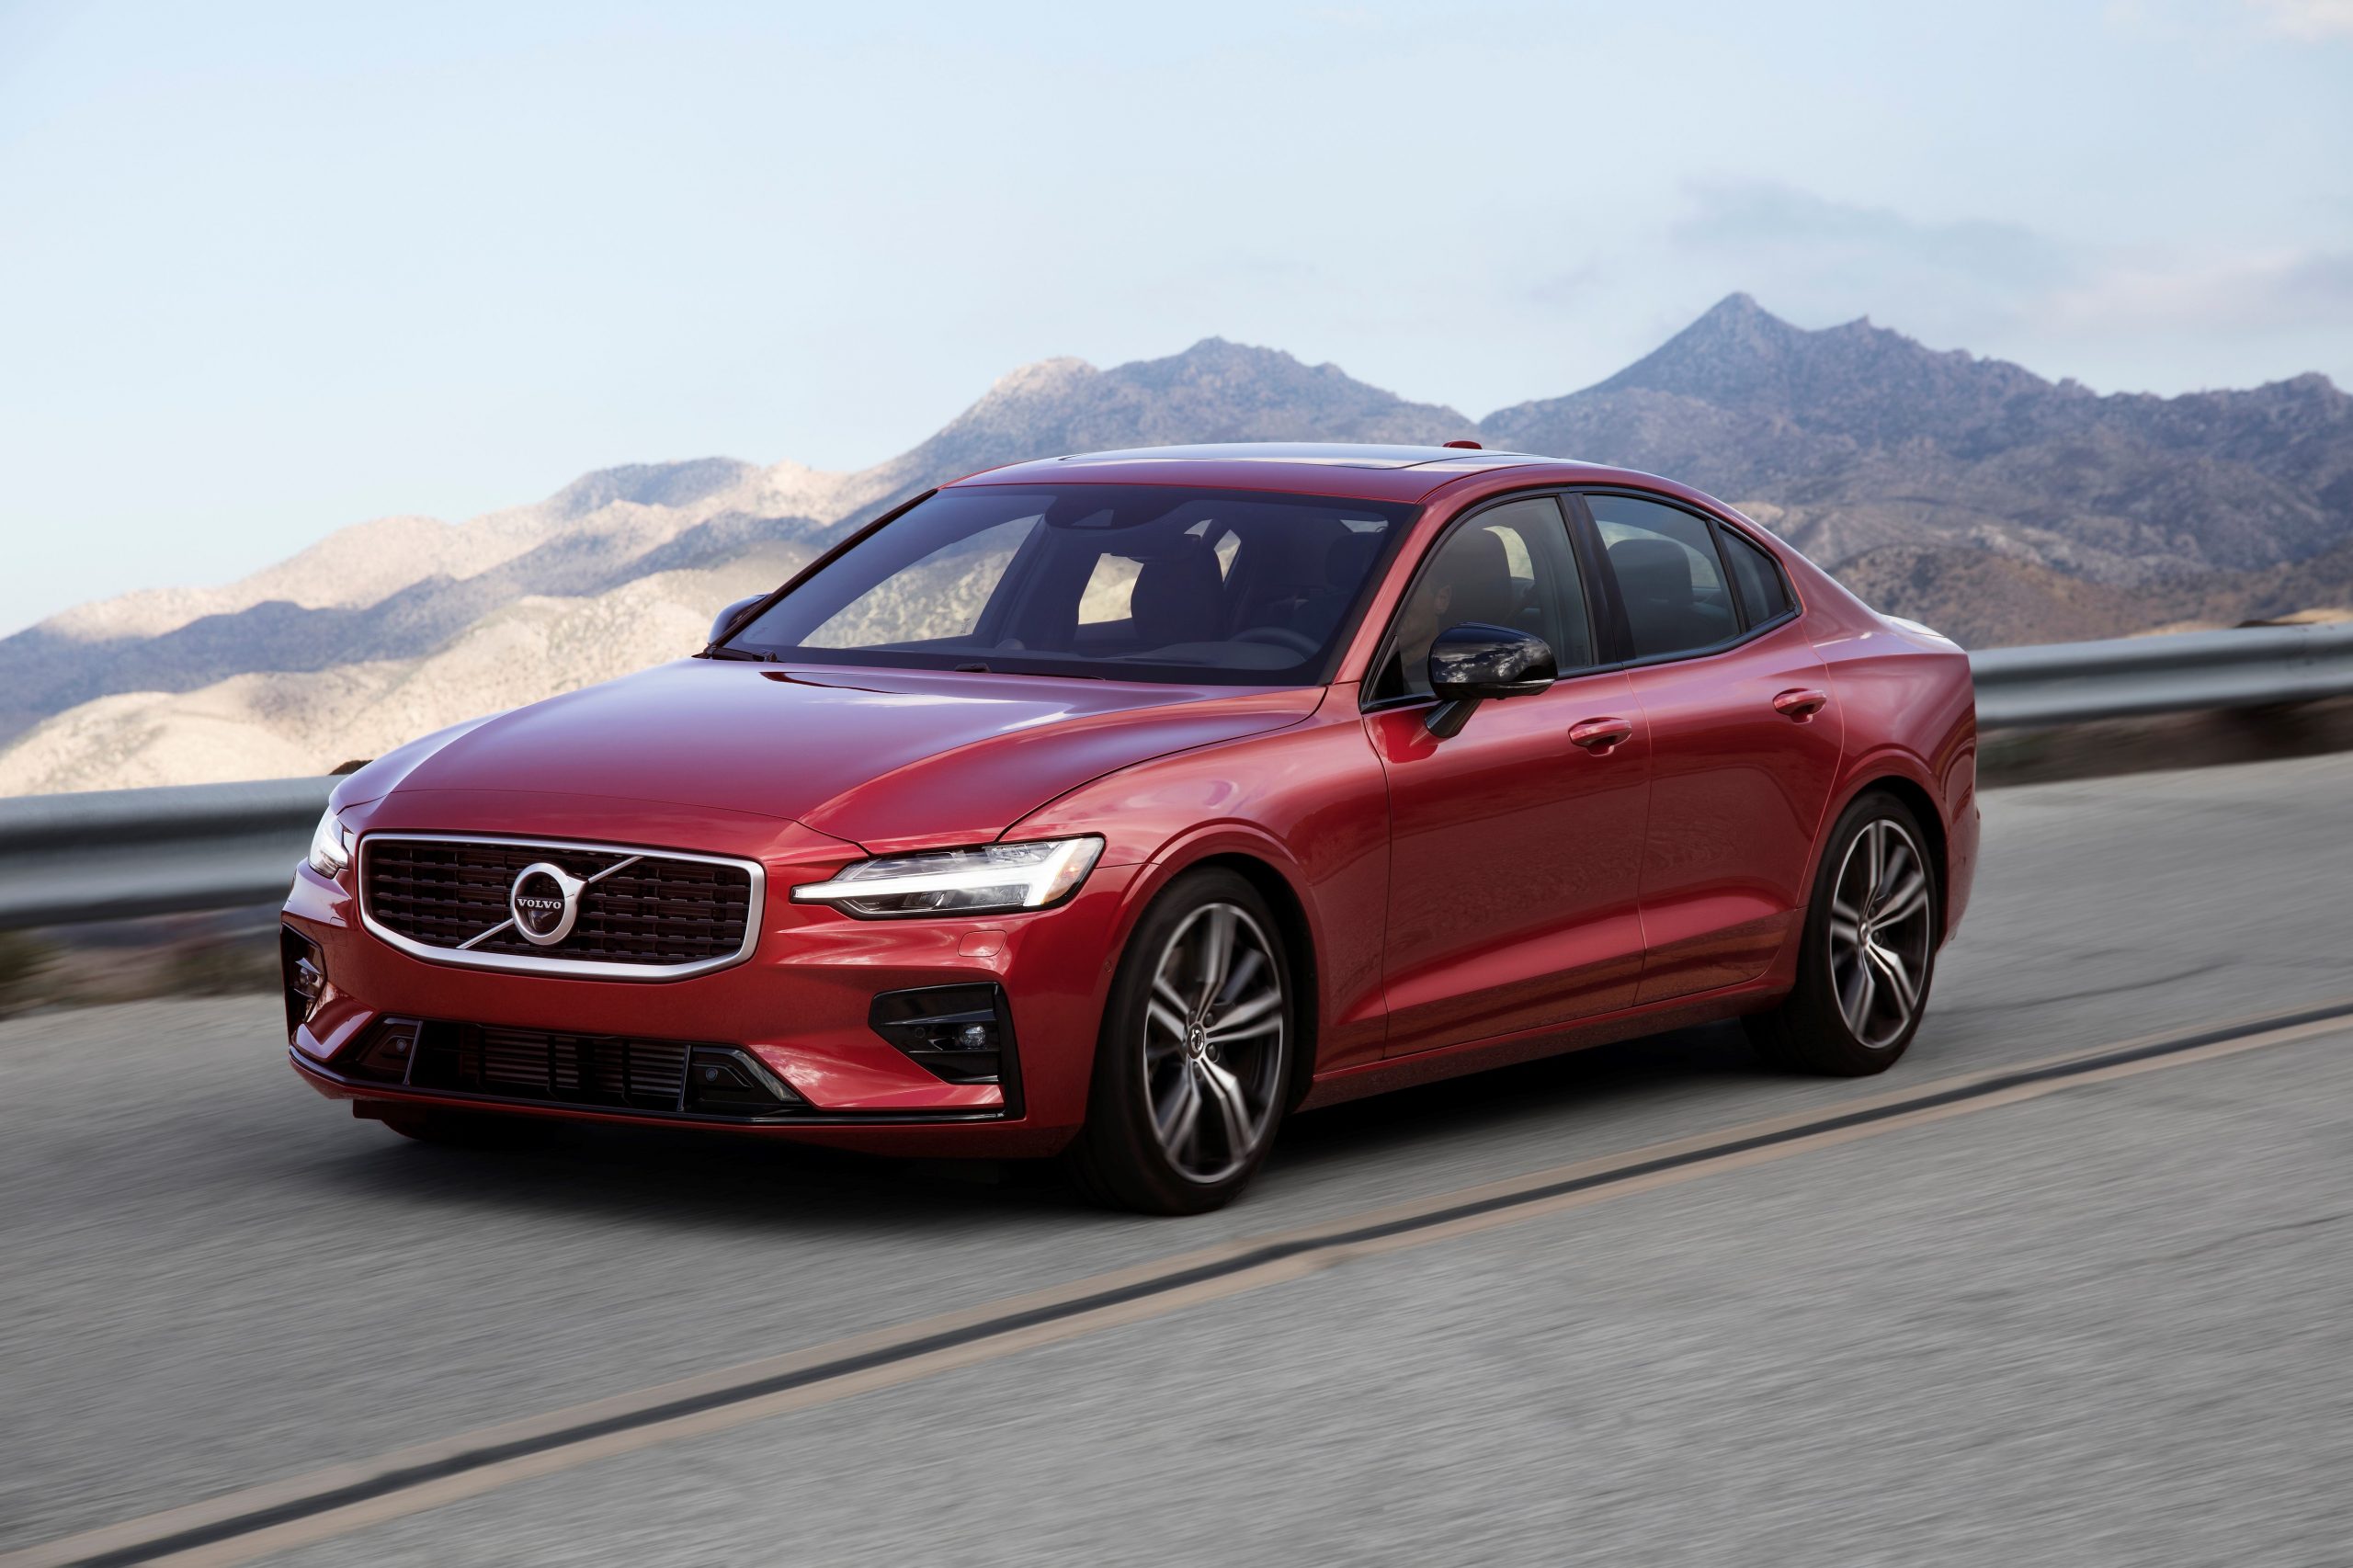 Third Generation Volvo S60 To Launch In India By March